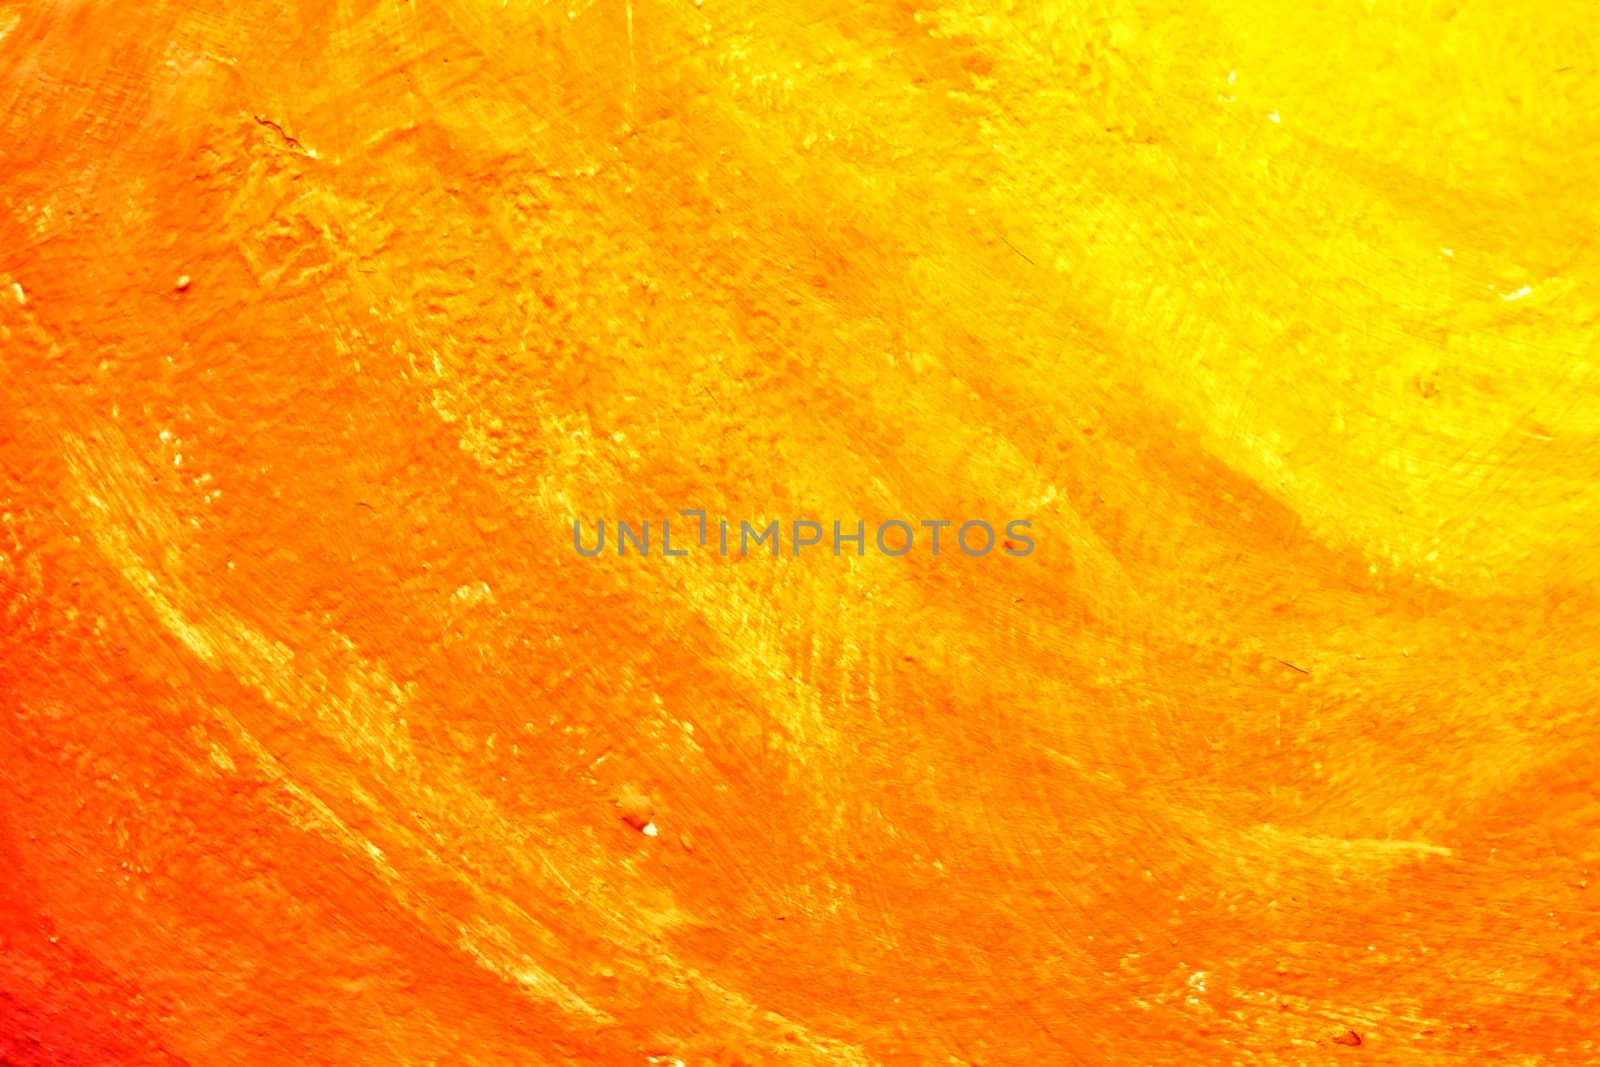 Orange Painting on Concrete Background. by mesamong